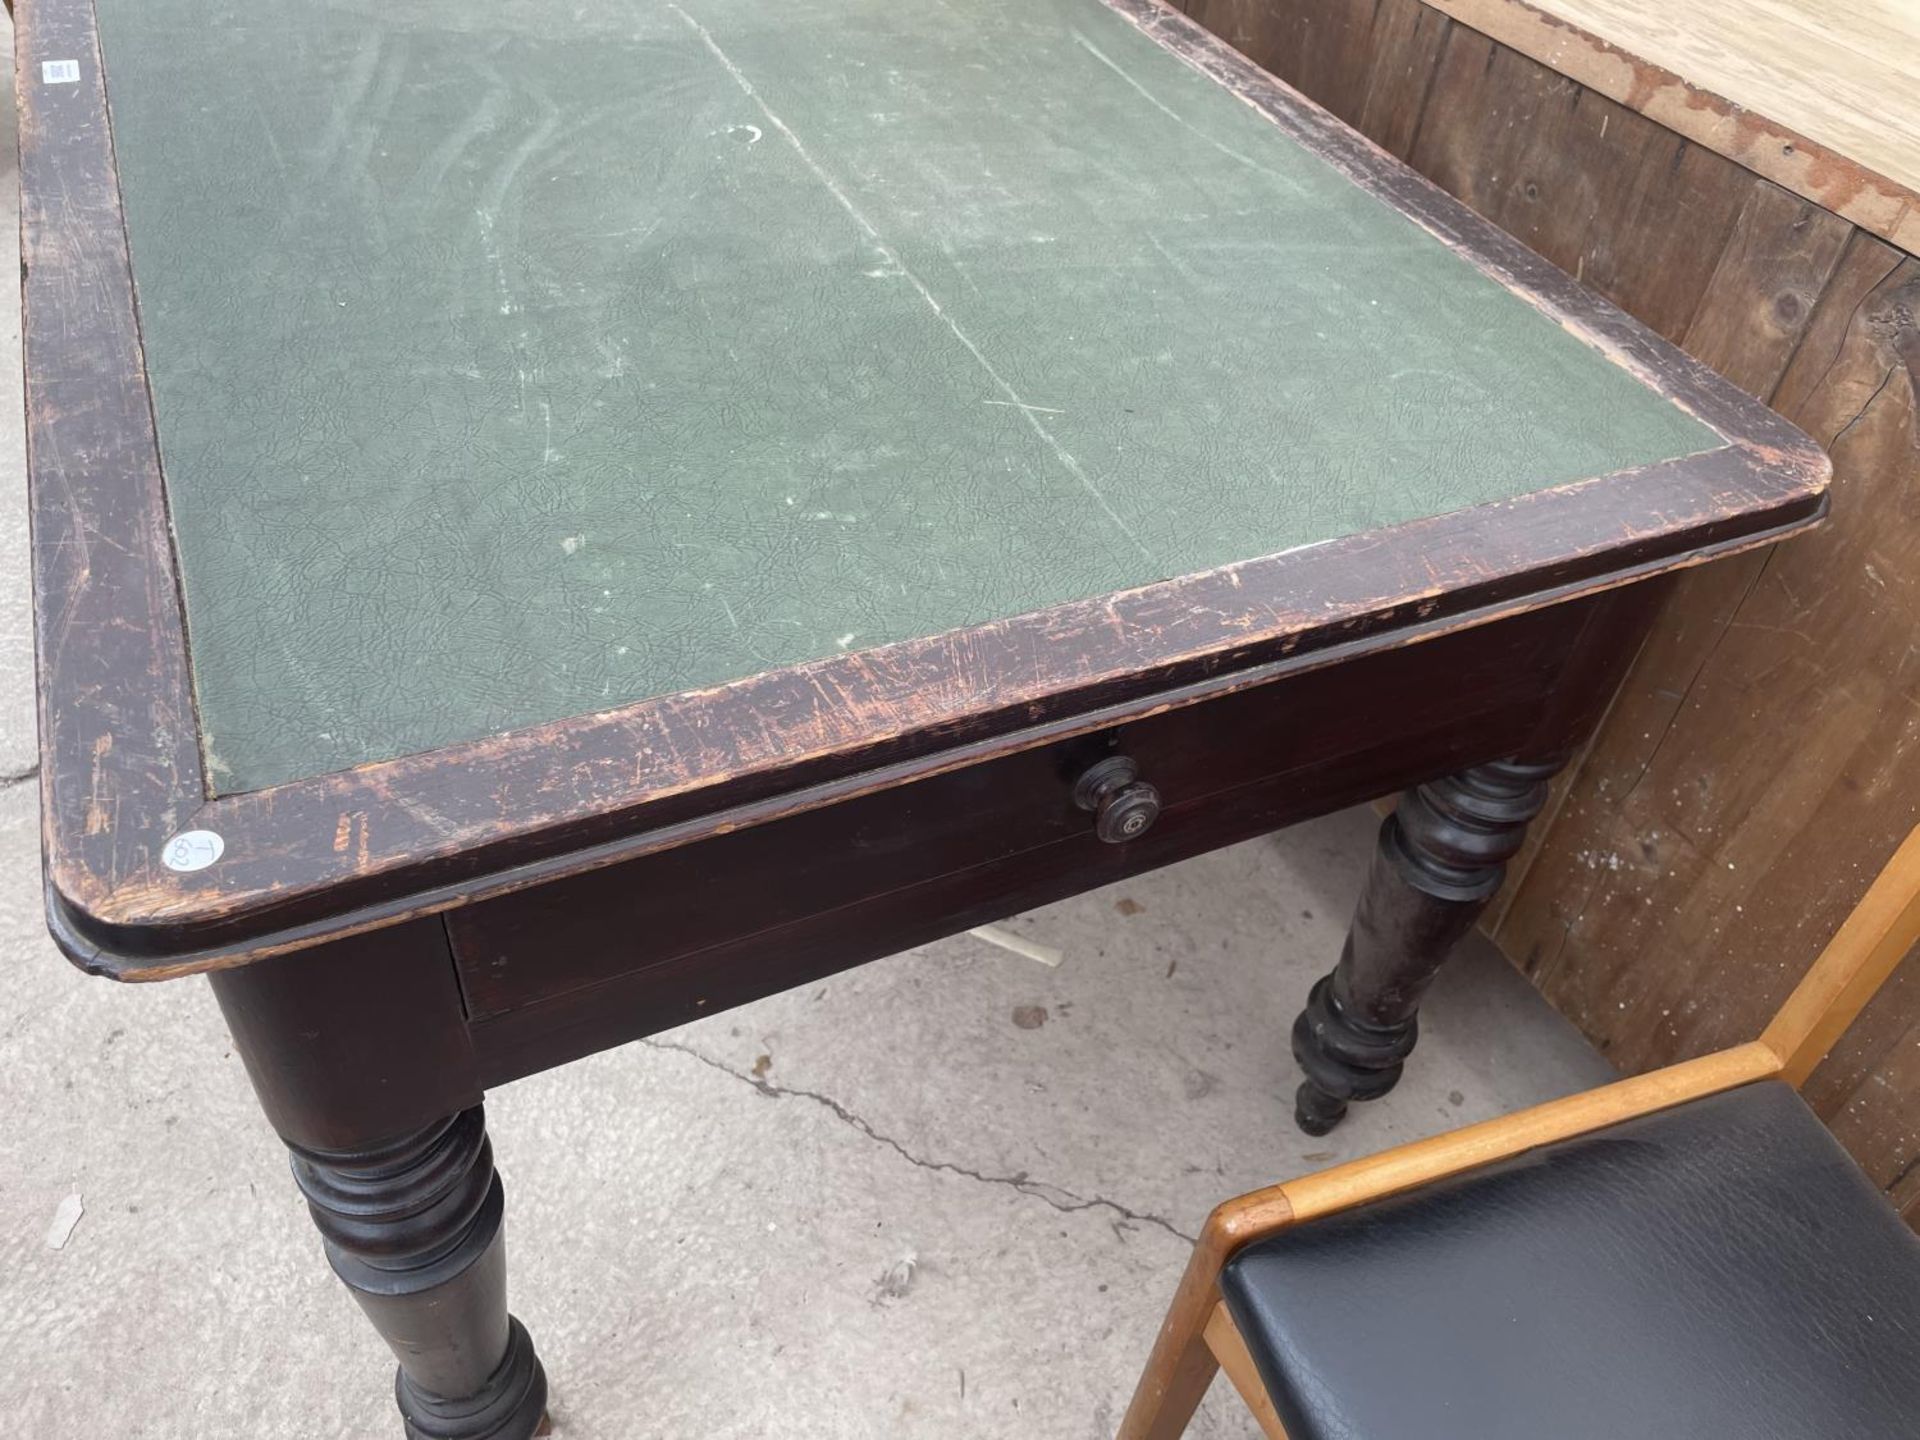 A VICTORIAN PINE OFFICE TABLE WITH TWO DRAWERS, ON TURNED LEGS, 71X36" WITH INSET LEATHERETTE TOP - Image 5 of 5